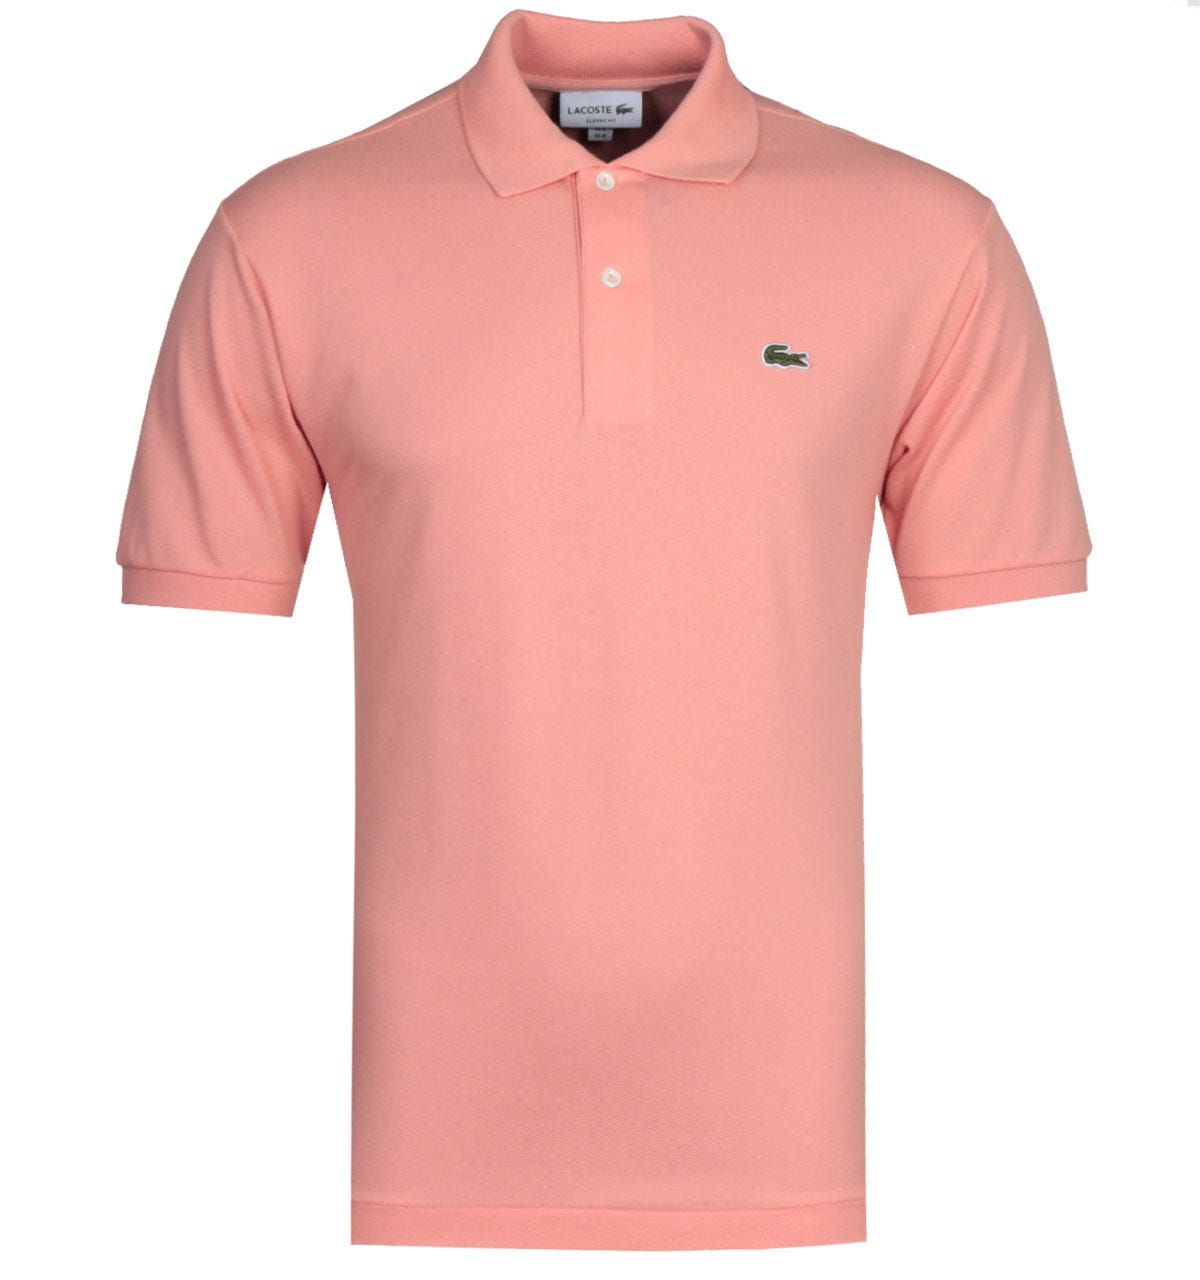 <p>A pure cotton composition, crafted by Lacoste. The Lacoste L1212 MC Homme Pink Polo Shirt is a lightweight garment, fitted with a two-button placket and ribbed trims. This iconic design is finished with the Lacoste logo embroidered at the chest.</p><ul><li>Cotton composition</li><li>Spread collar</li><li>Two button placket</li><li>Ribbed trims</li><li>Lacoste logo embroidered on chest</li></ul><p>Style & Fit:</p><ul><li>Regular fit</li><li>Fits true to size</li></ul><p>Fabric Composition & Care:</p><ul><li>100% Cotton</li><li>Machine washable</li></ul>